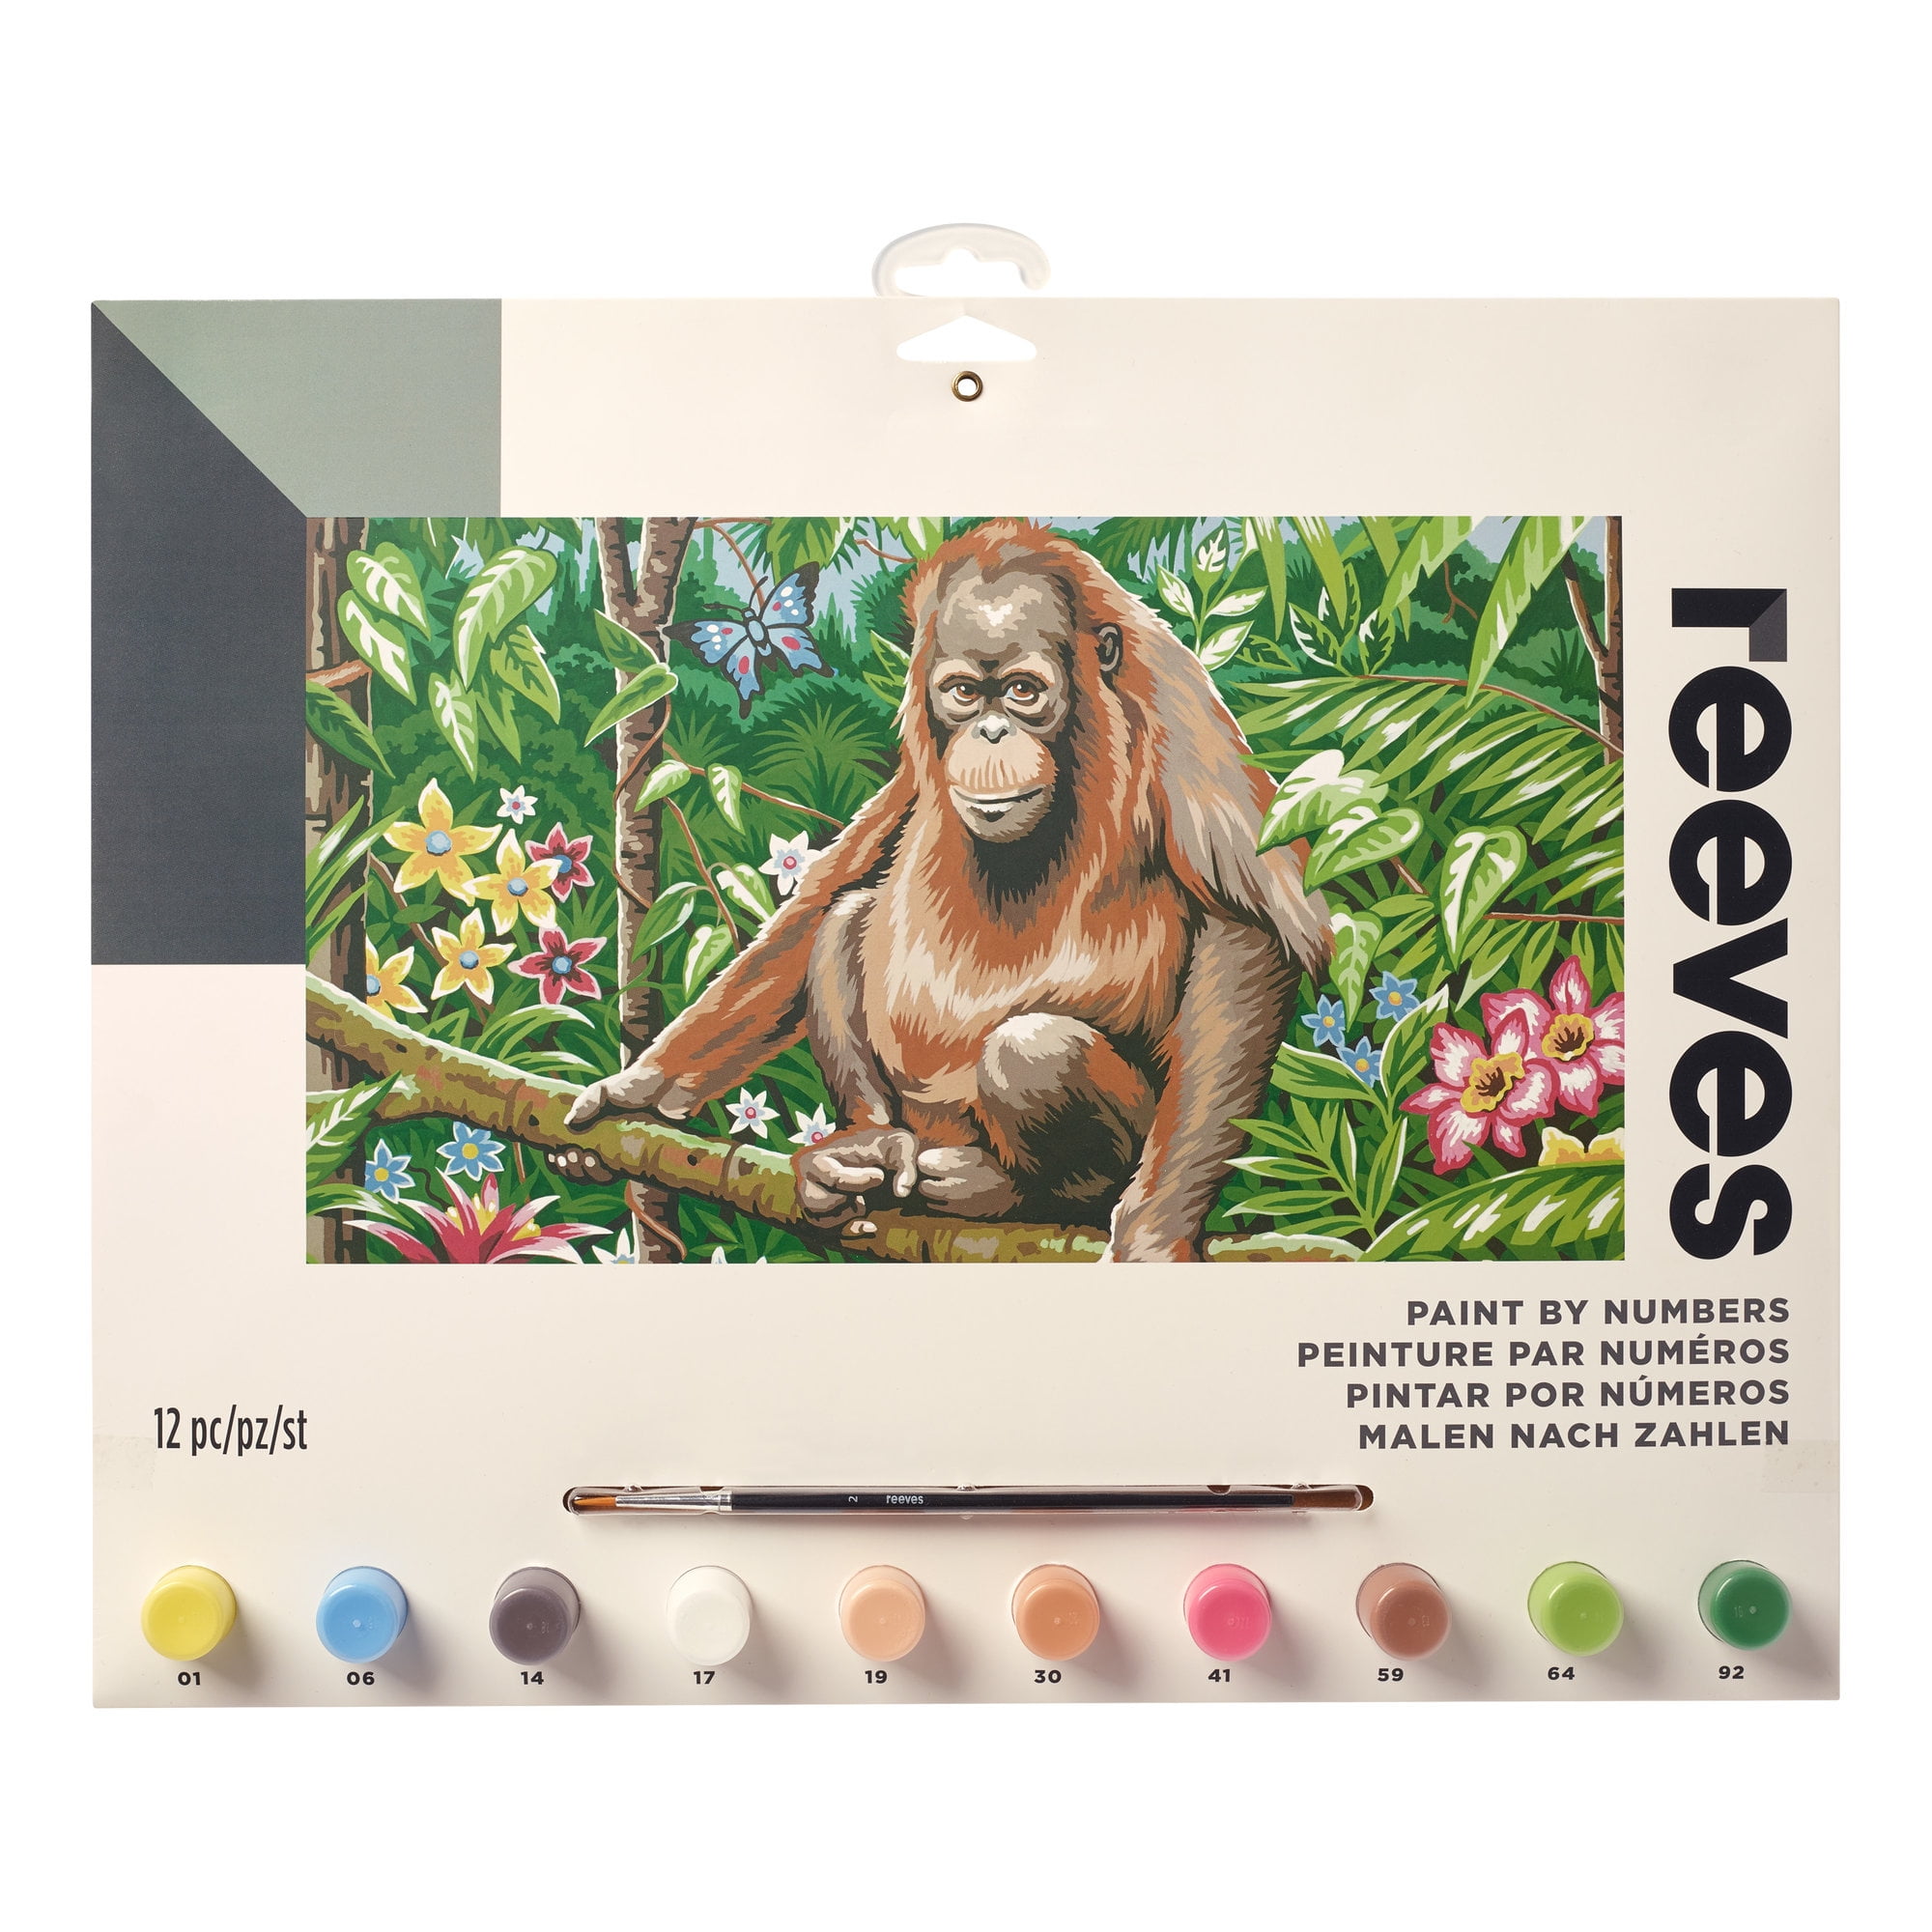 Paint by Numbers for Adults. Monkey Adult Paint by Number Kits